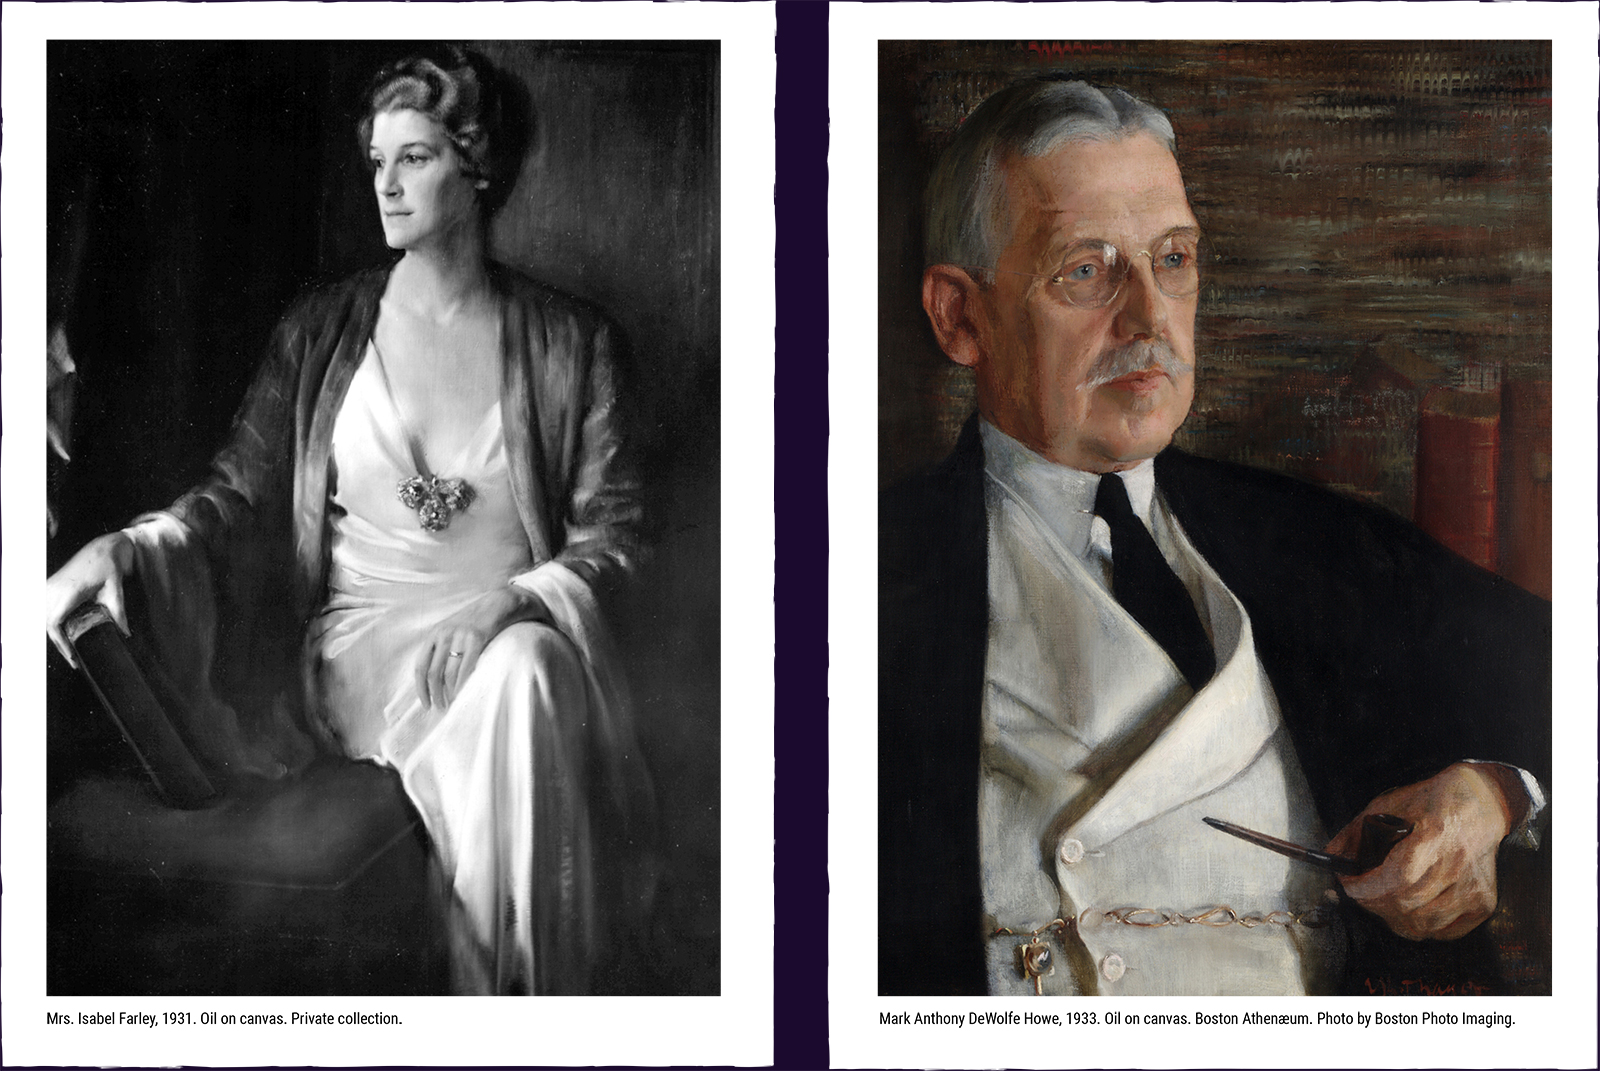 Two portrait paintings. (1) Mrs. Isabel Farley, 1931. Oil on canvas. Private collection. (2) Mark Anthony DeWolfe Howe, 1933. Oil on canvas. Boston Athenaeum. Photo by Boston Photo Imaging.